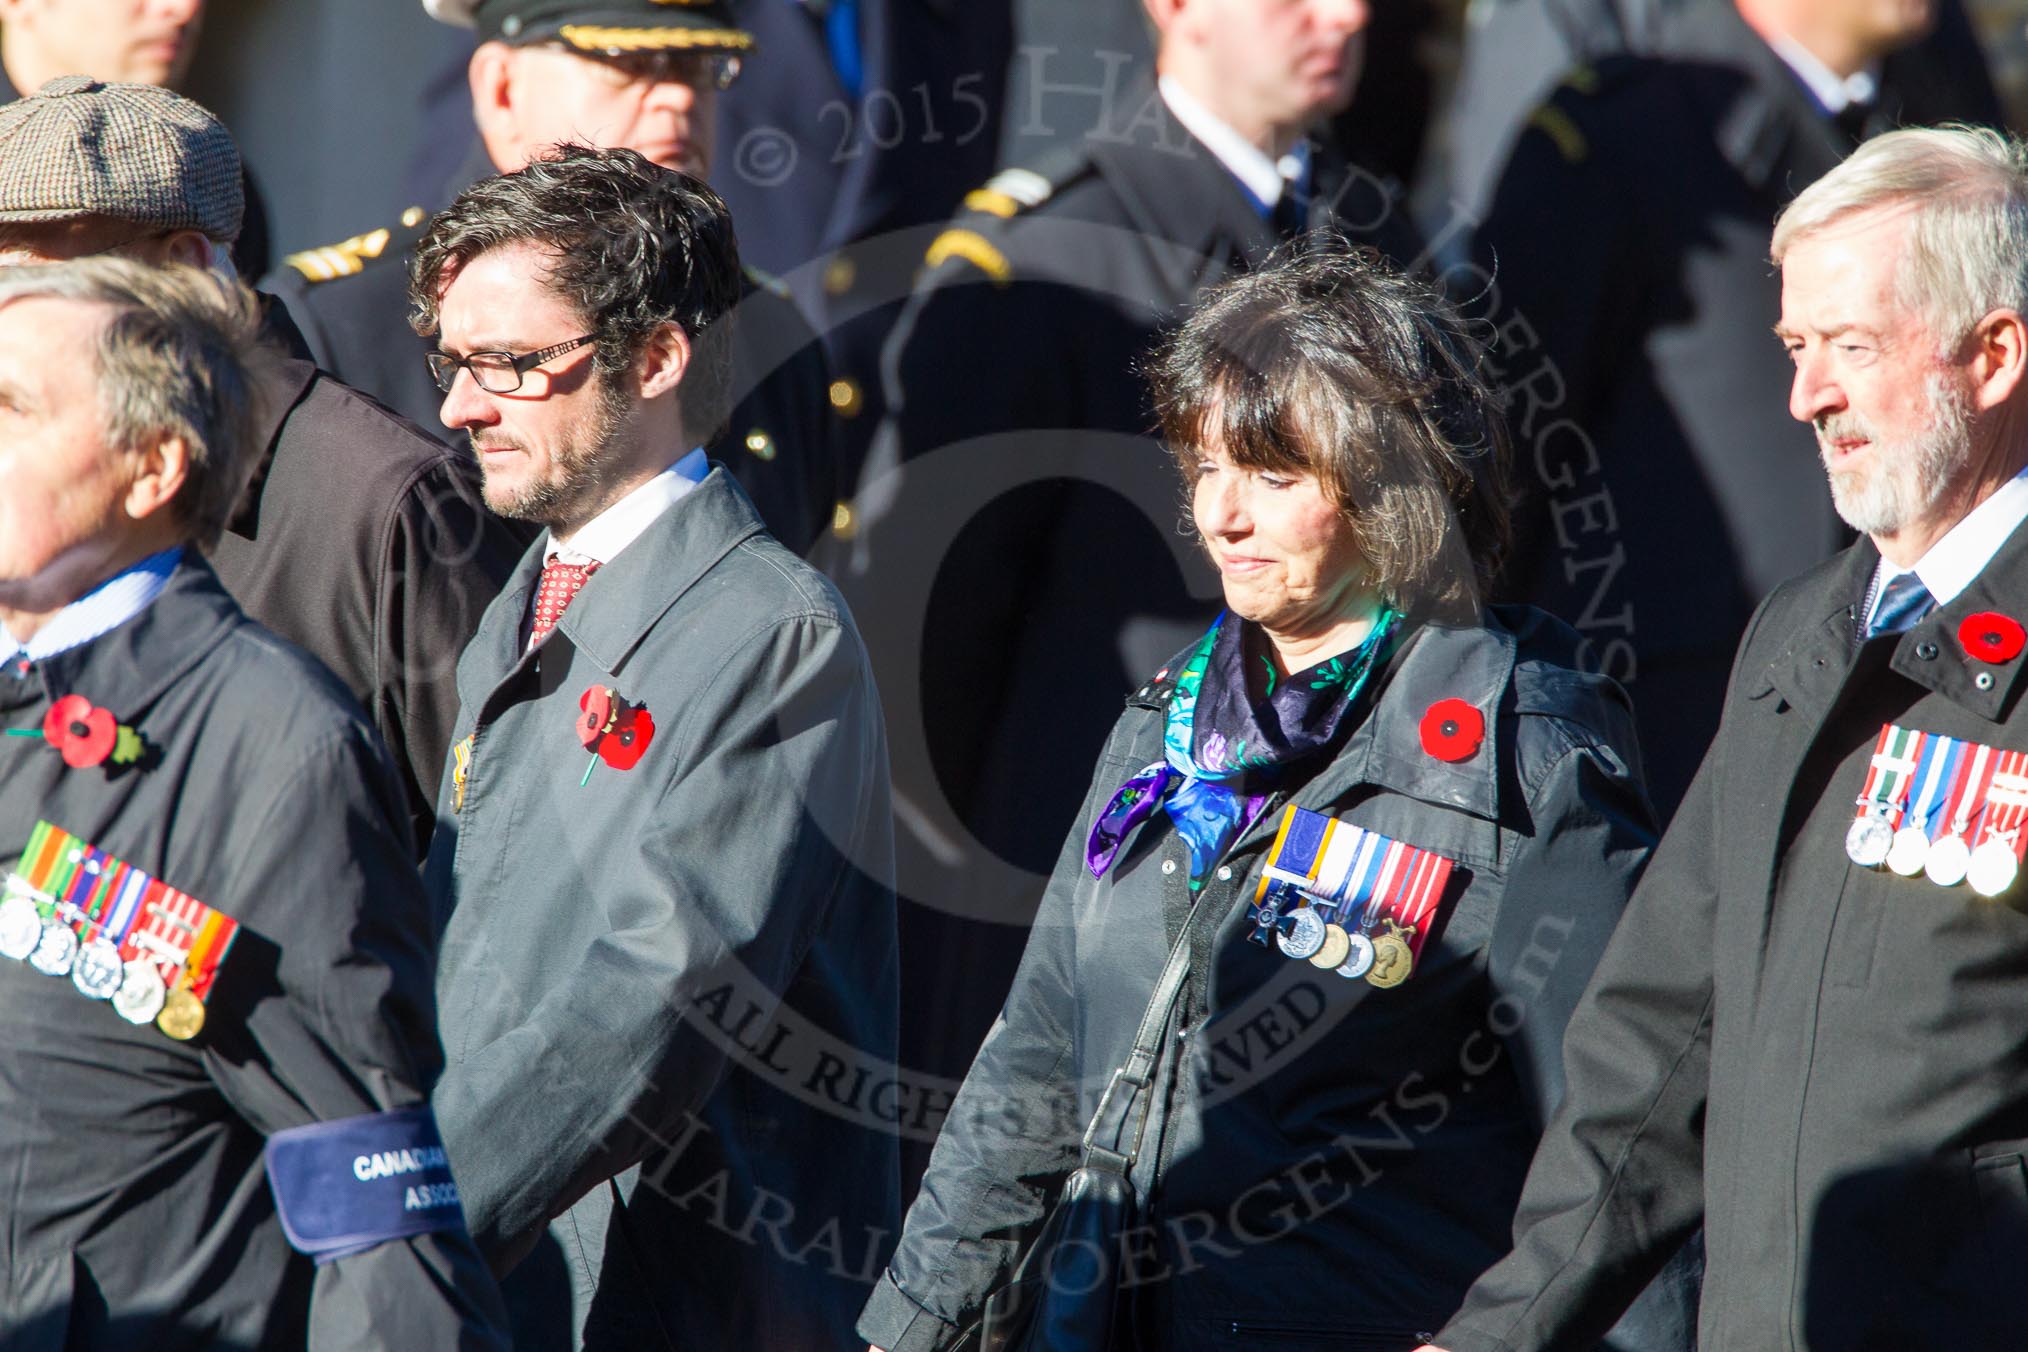 Remembrance Sunday Cenotaph March Past 2013: D7 - Canadian Veterans Association..
Press stand opposite the Foreign Office building, Whitehall, London SW1,
London,
Greater London,
United Kingdom,
on 10 November 2013 at 11:39, image #73